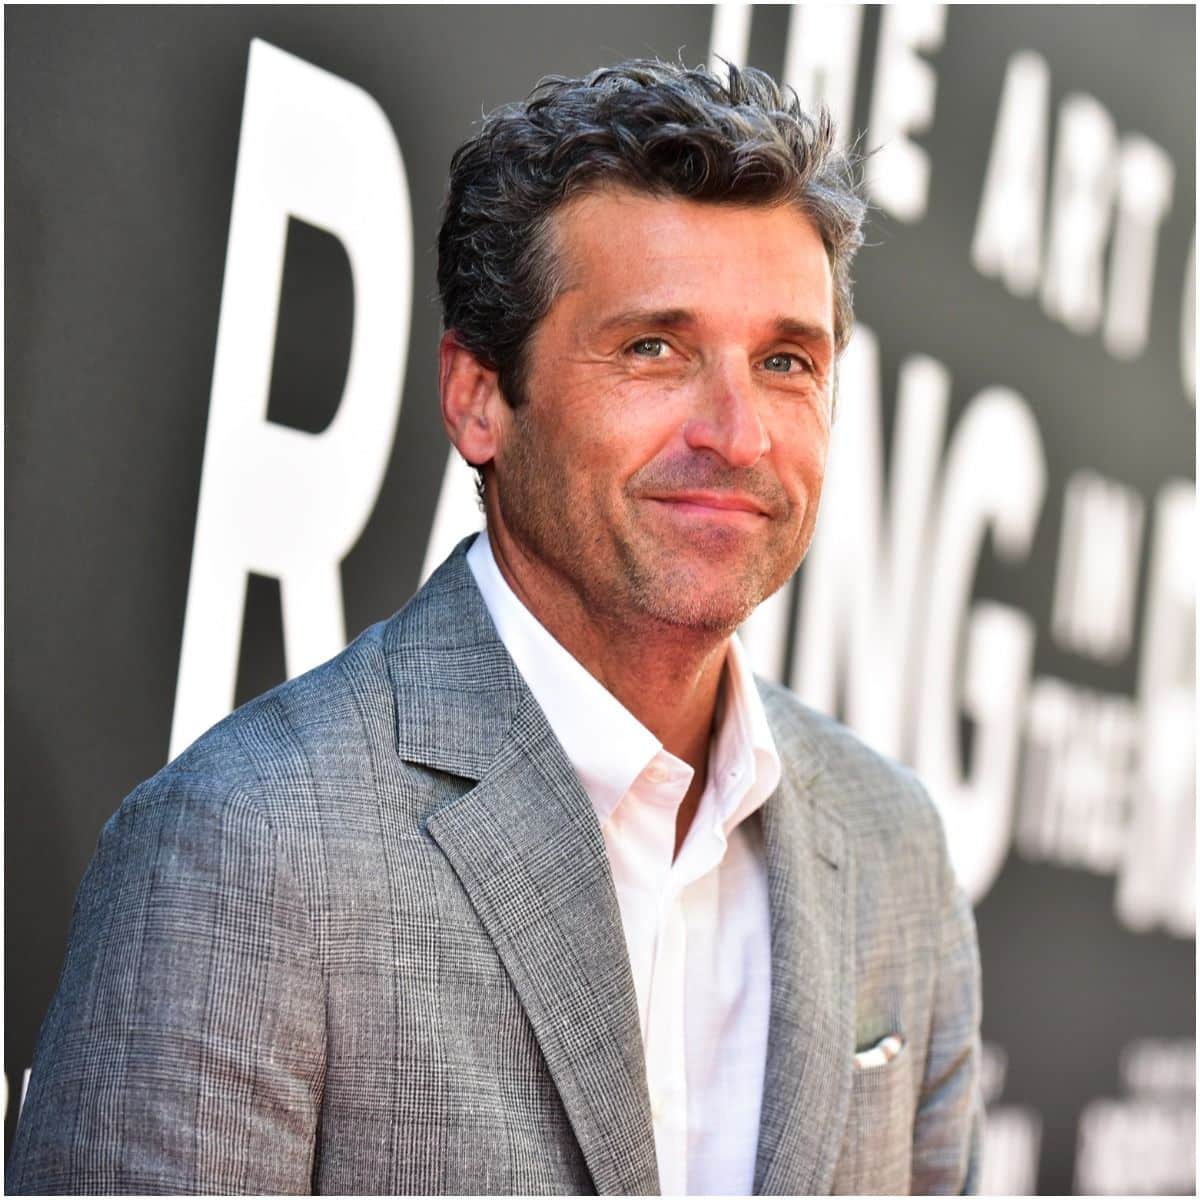 Why did Patrick Dempsey leave Grey's Anatomy? - Famous People Today